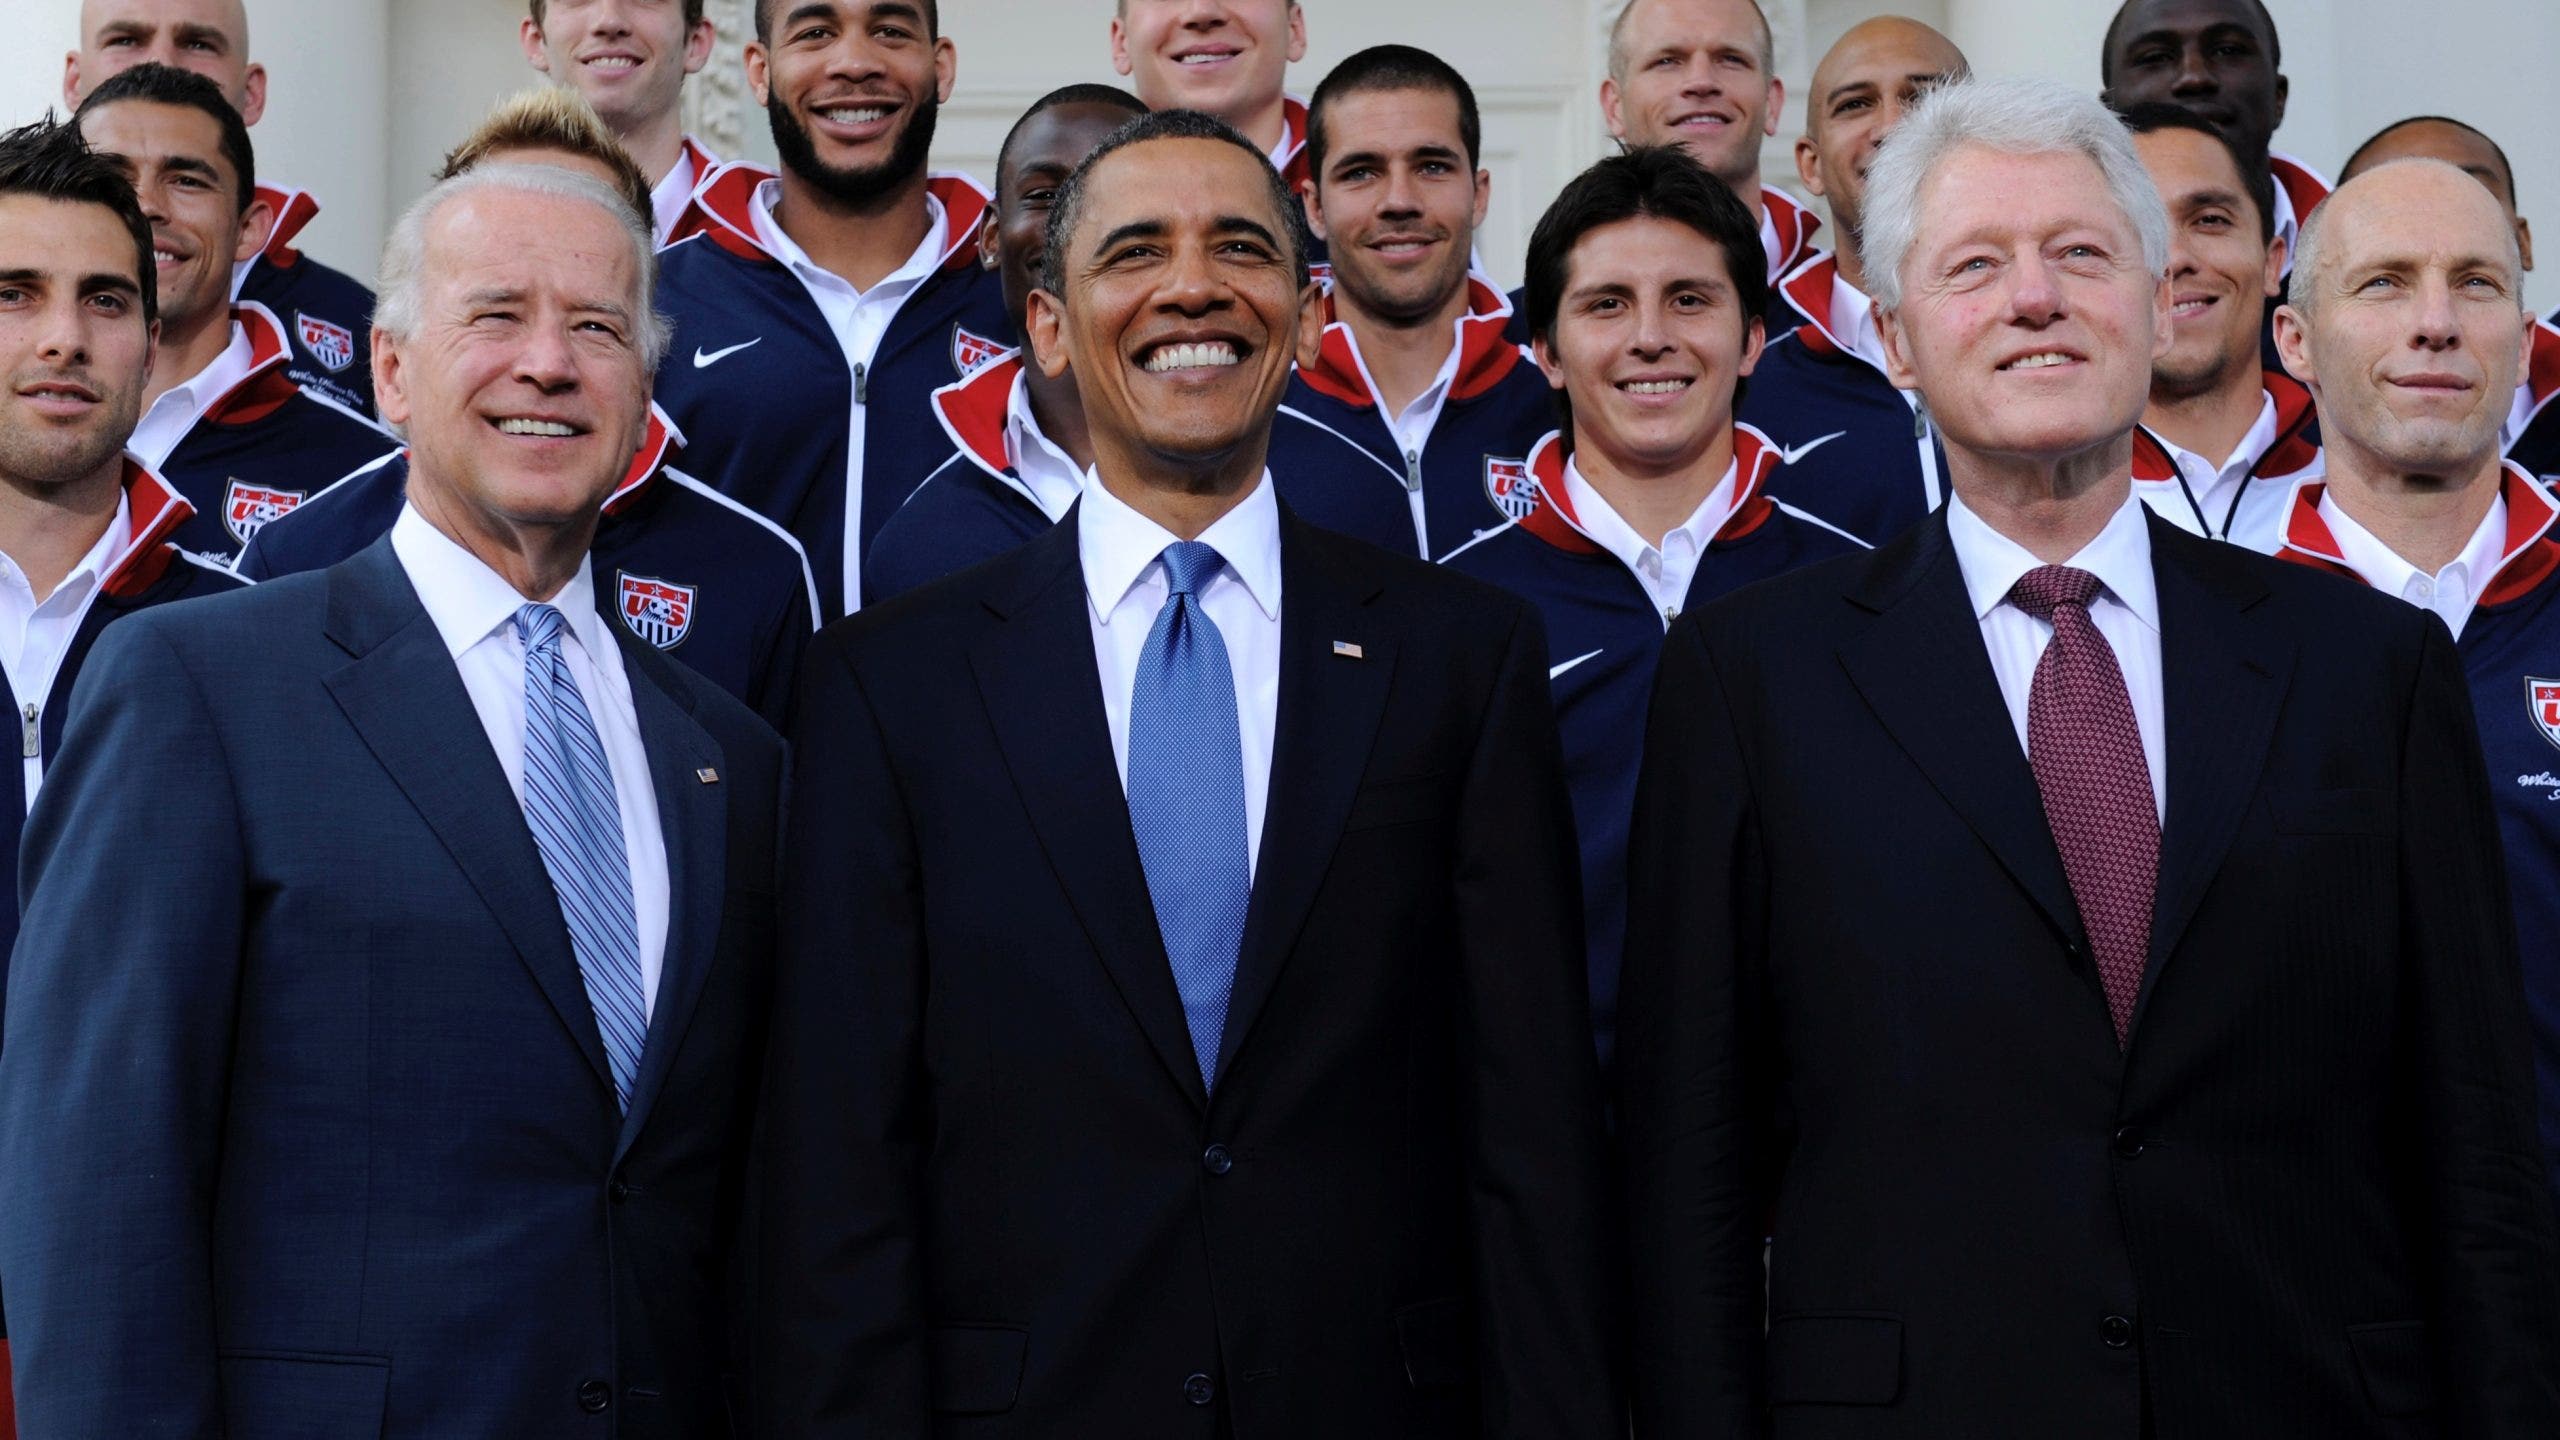 President Biden Teams Up With Former Presidents Obama And Clinton For Fundraising Event Ahead Of 